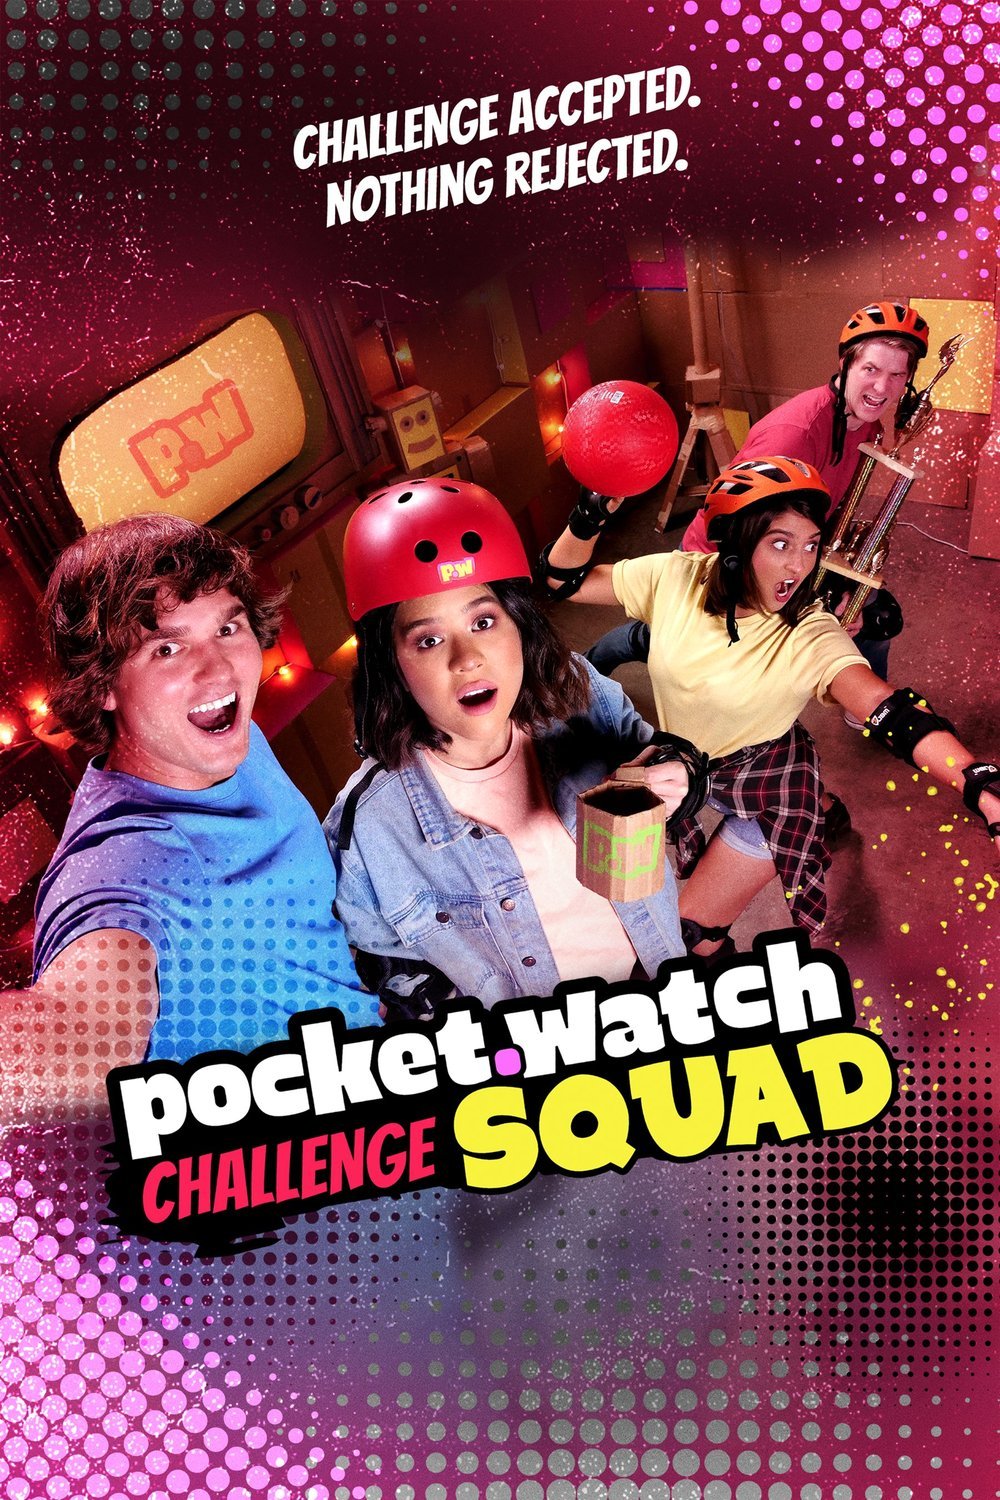 Poster of the movie pocket.watch Challenge Squad